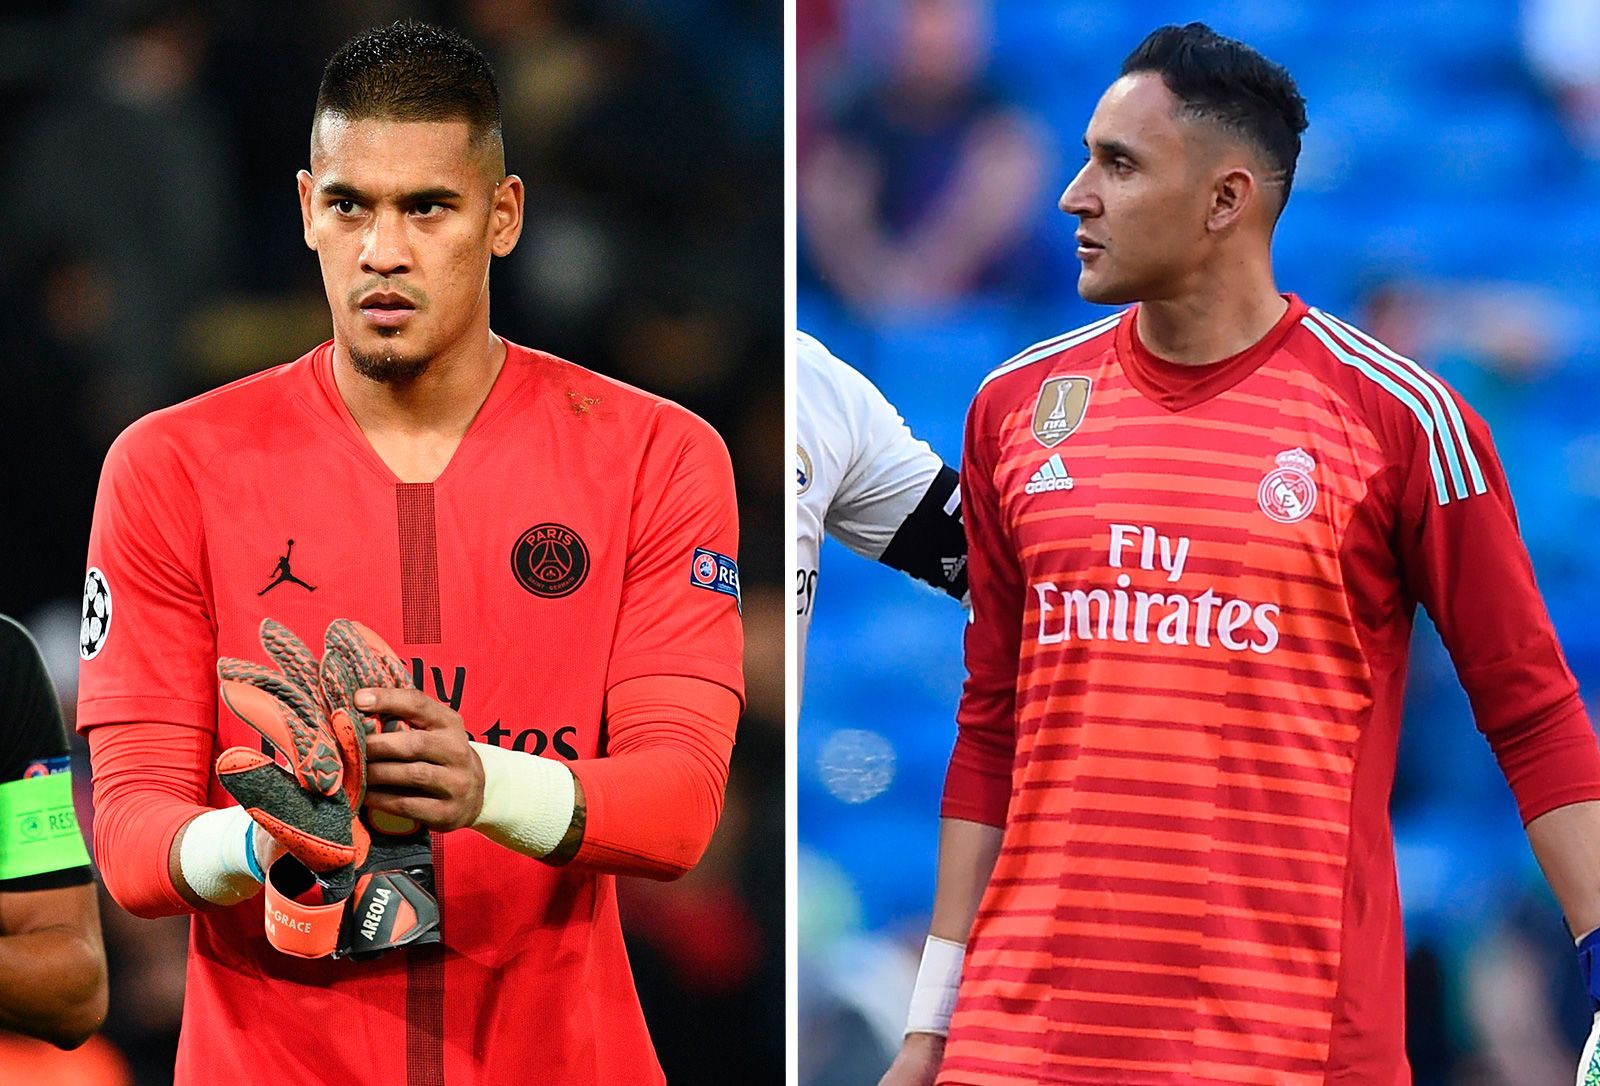 Areola Will play in the Madrid and Keylor in the PSG